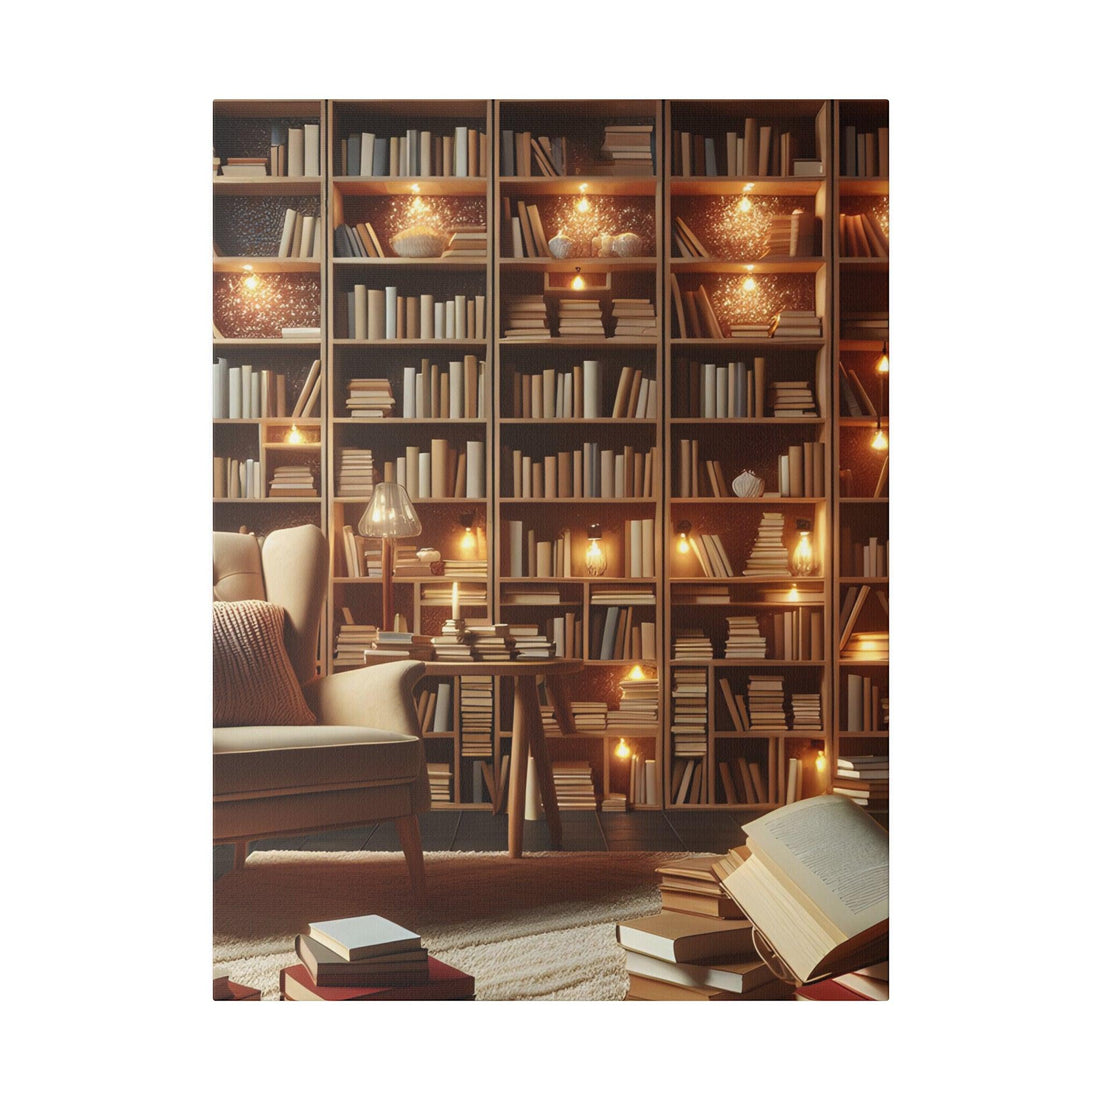 "Booklore Bliss Canvas Wall Art" - The Alice Gallery